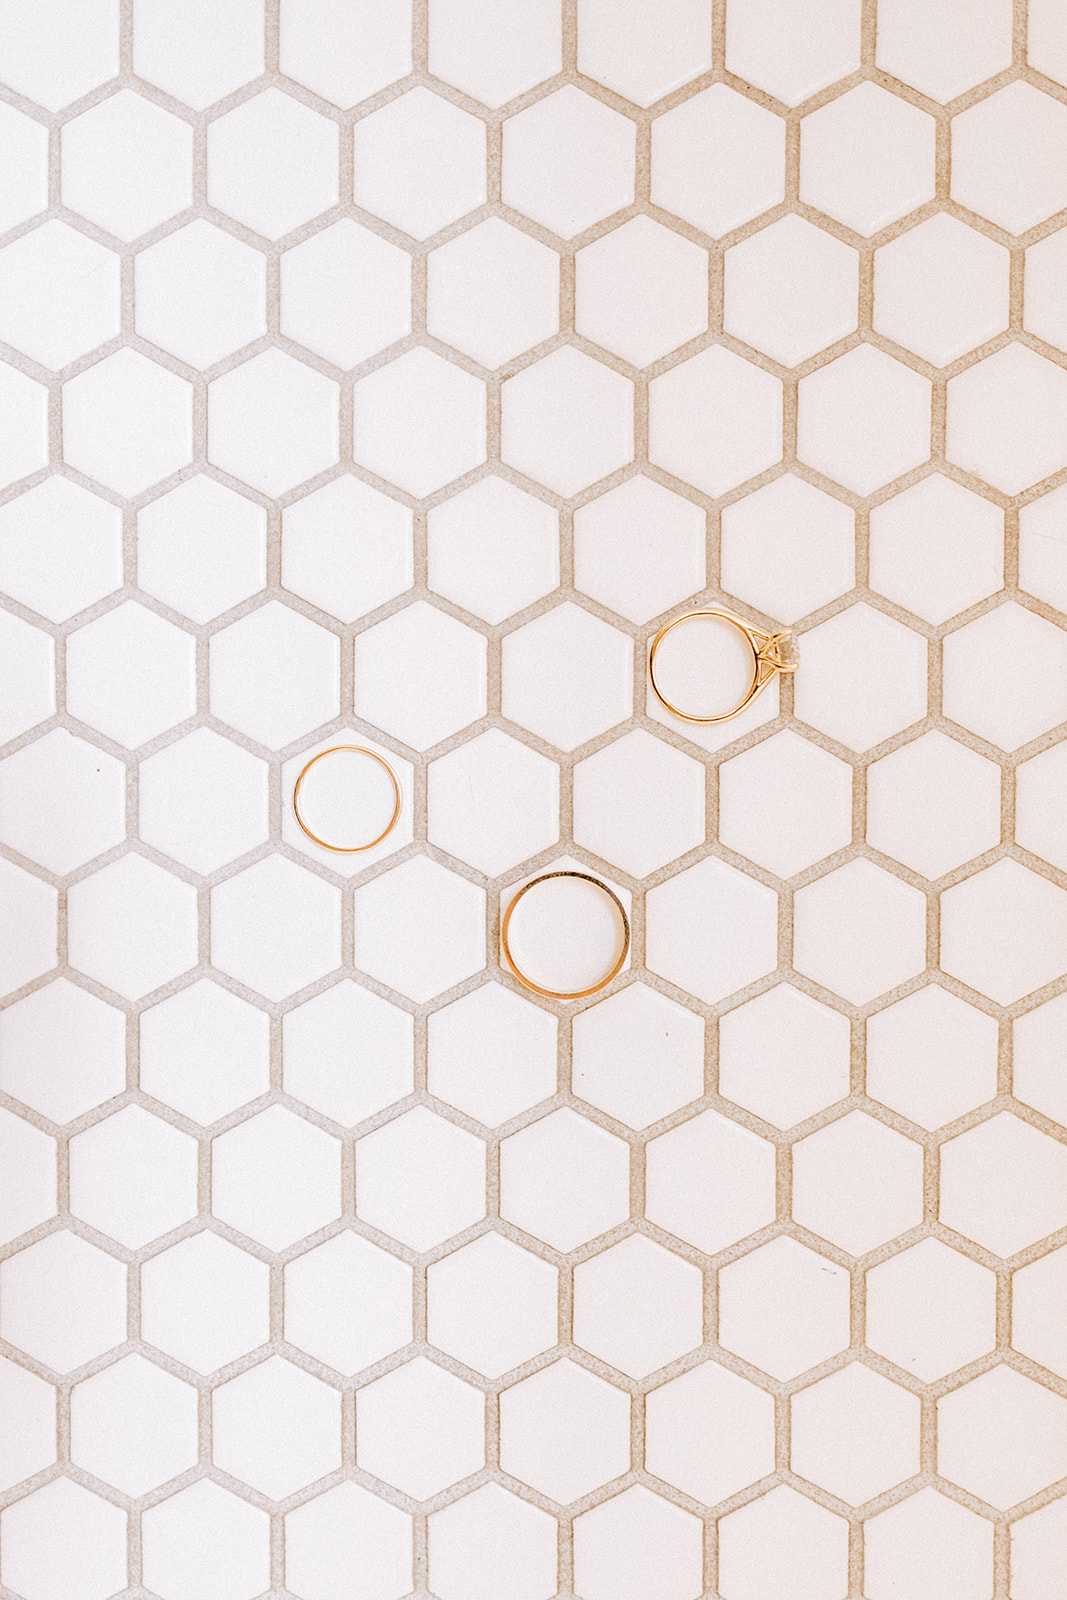 three gold rings are set on a tiled floor during a wedding day